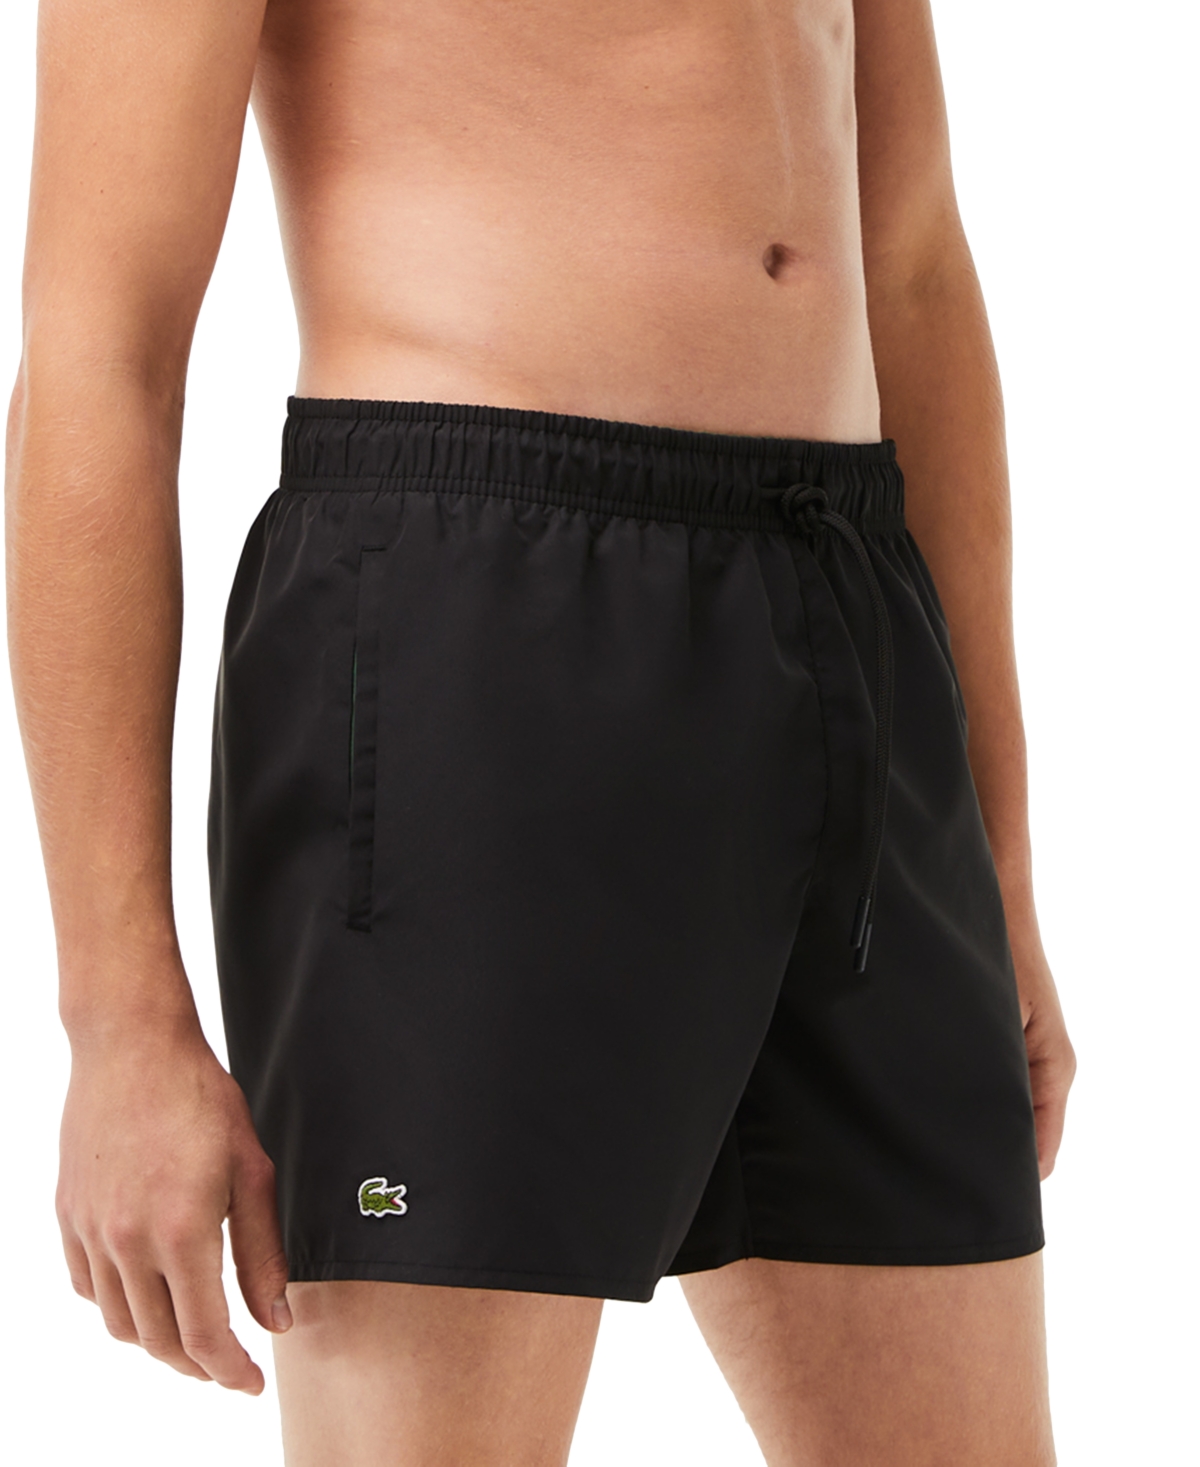 Lacoste Light Quick Dry Swim Shorts Mh6270 In Black/green 964